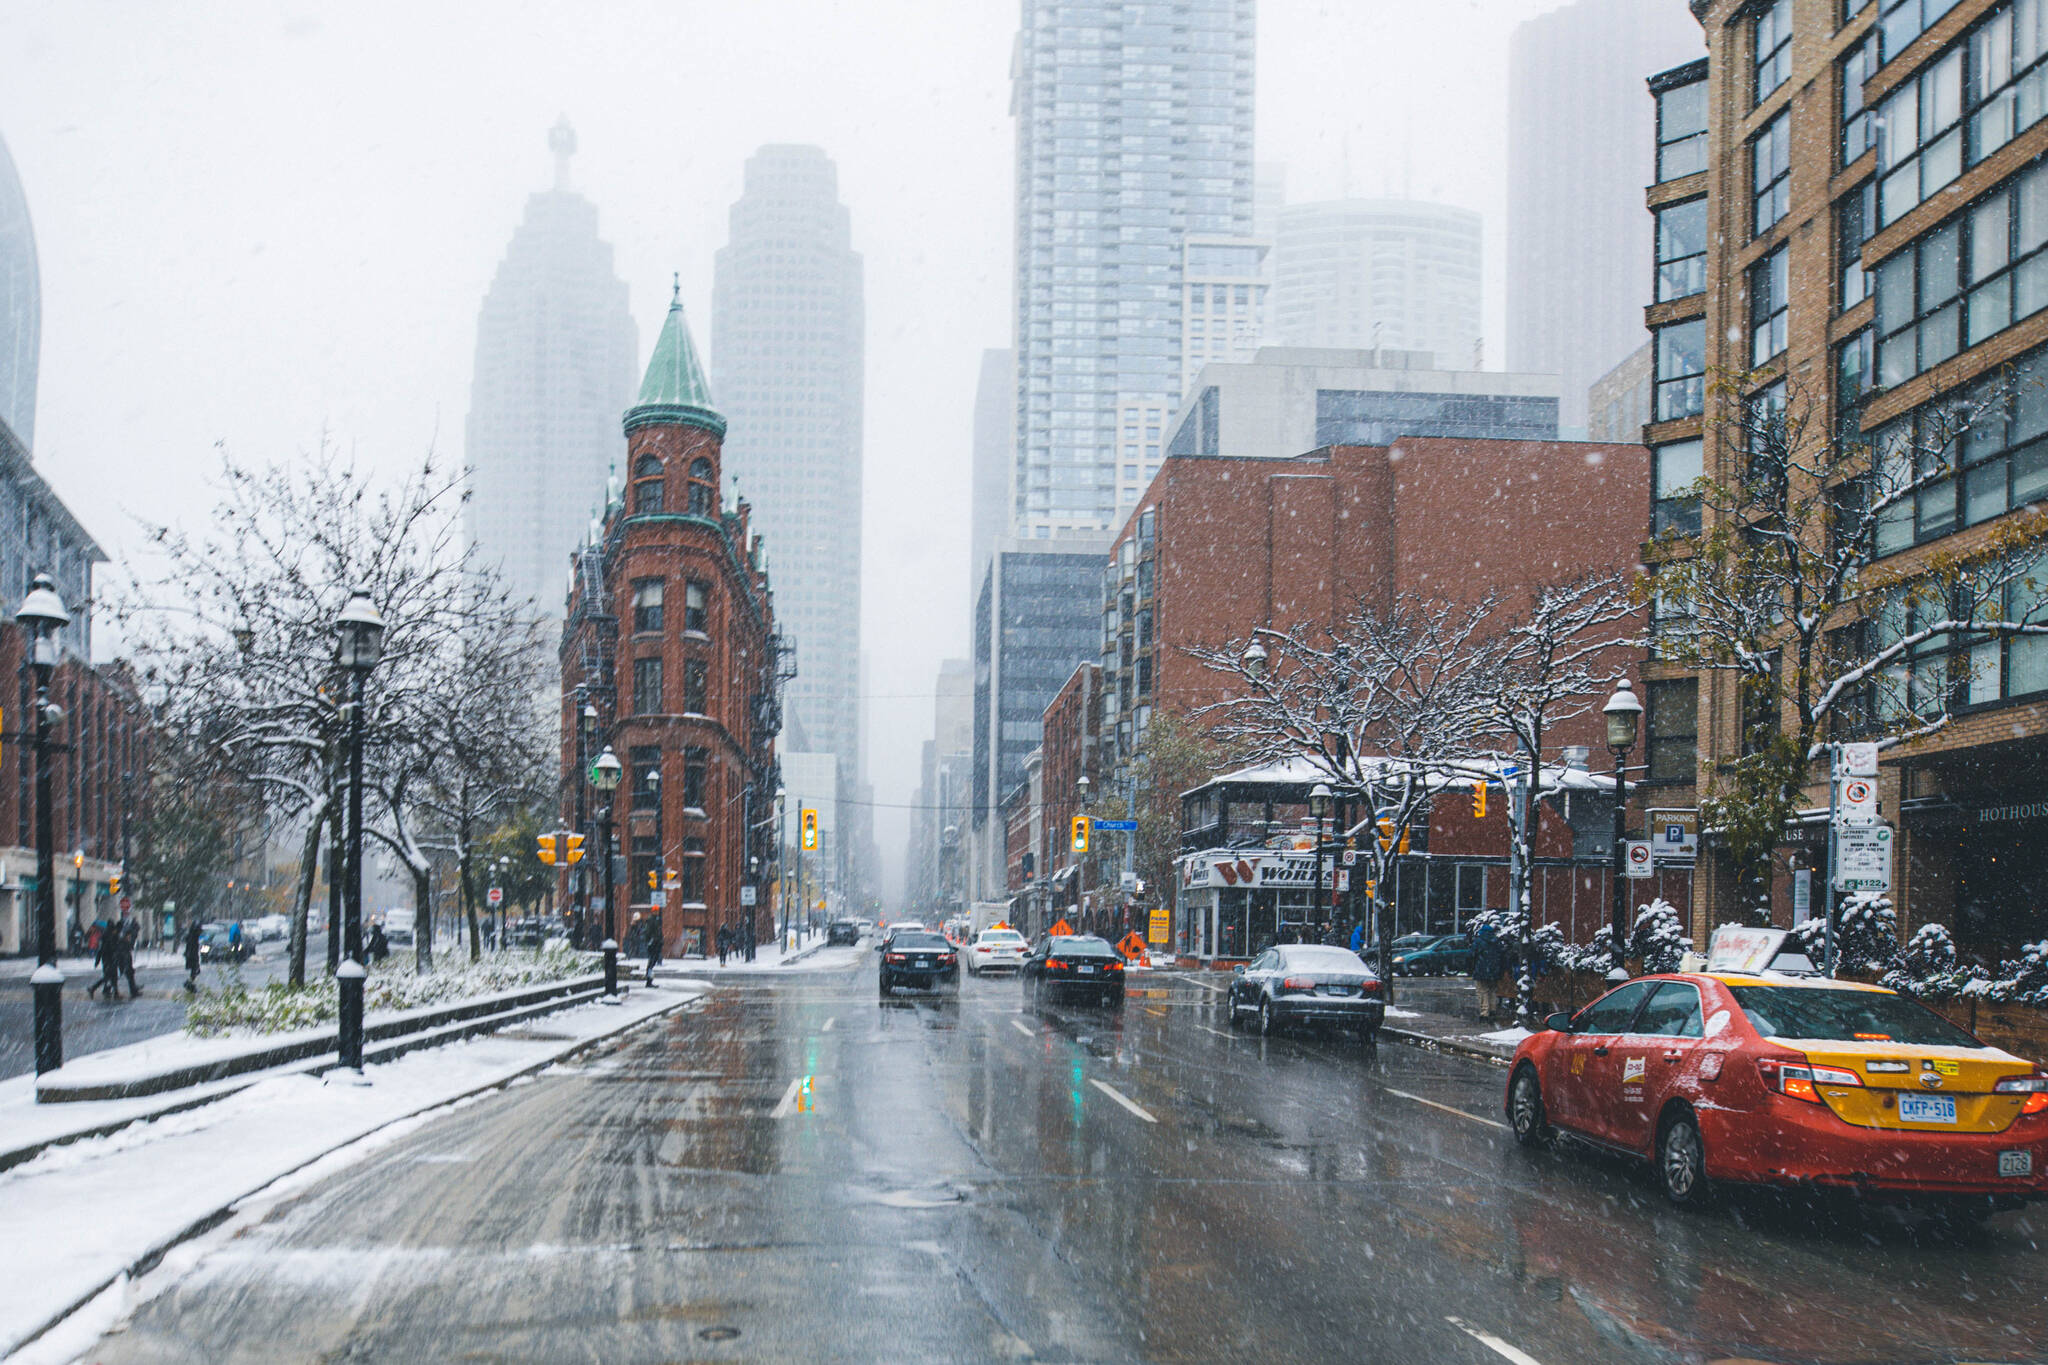 Toronto is about to get hit with a blast of messy winter weather